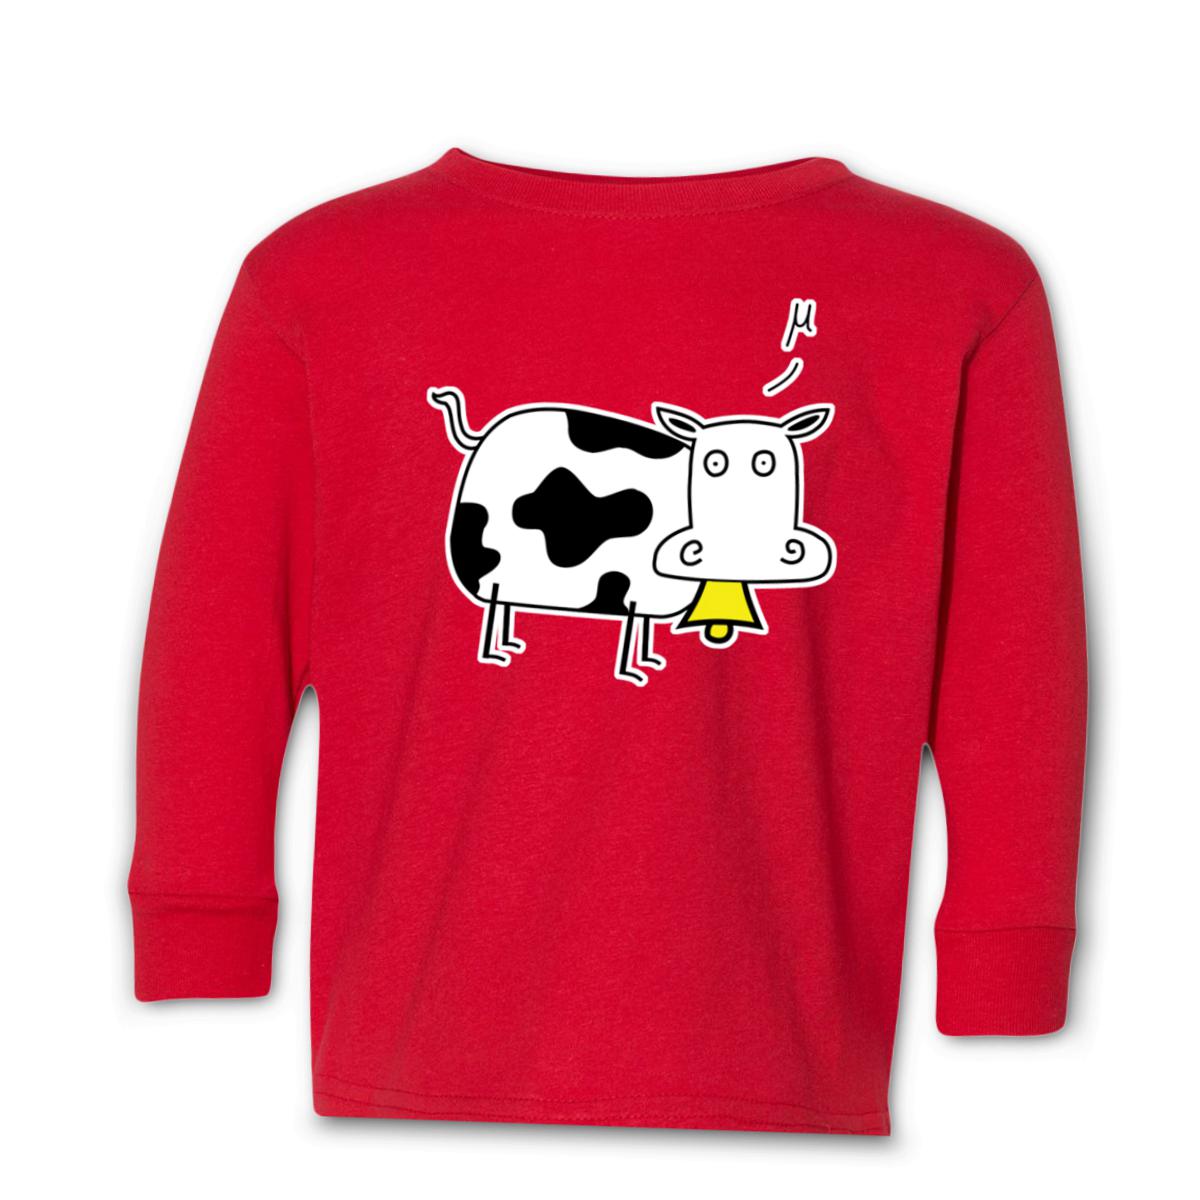 Mu Cow Toddler Long Sleeve Tee 4T red